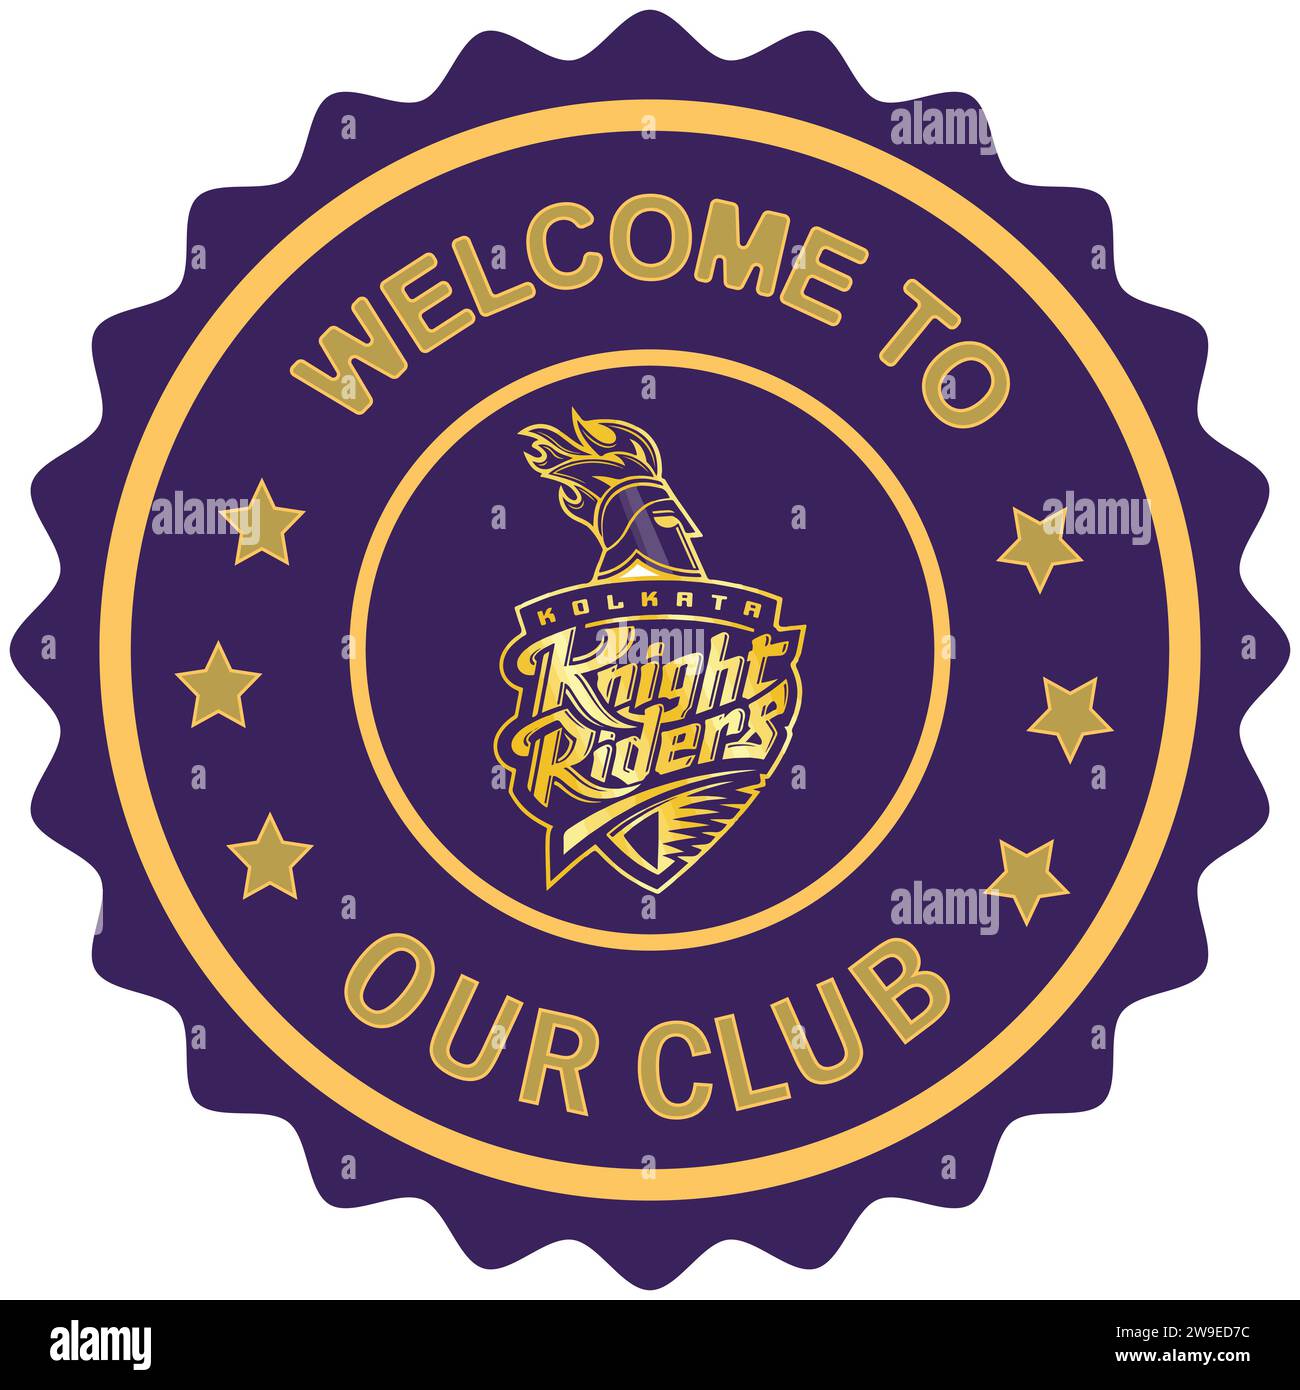 Welcome to Kolkata Knight Riders our club Colorful stamp and seal, Indian professional Cricket club, Vector Illustration Abstract Editable image Stock Vector